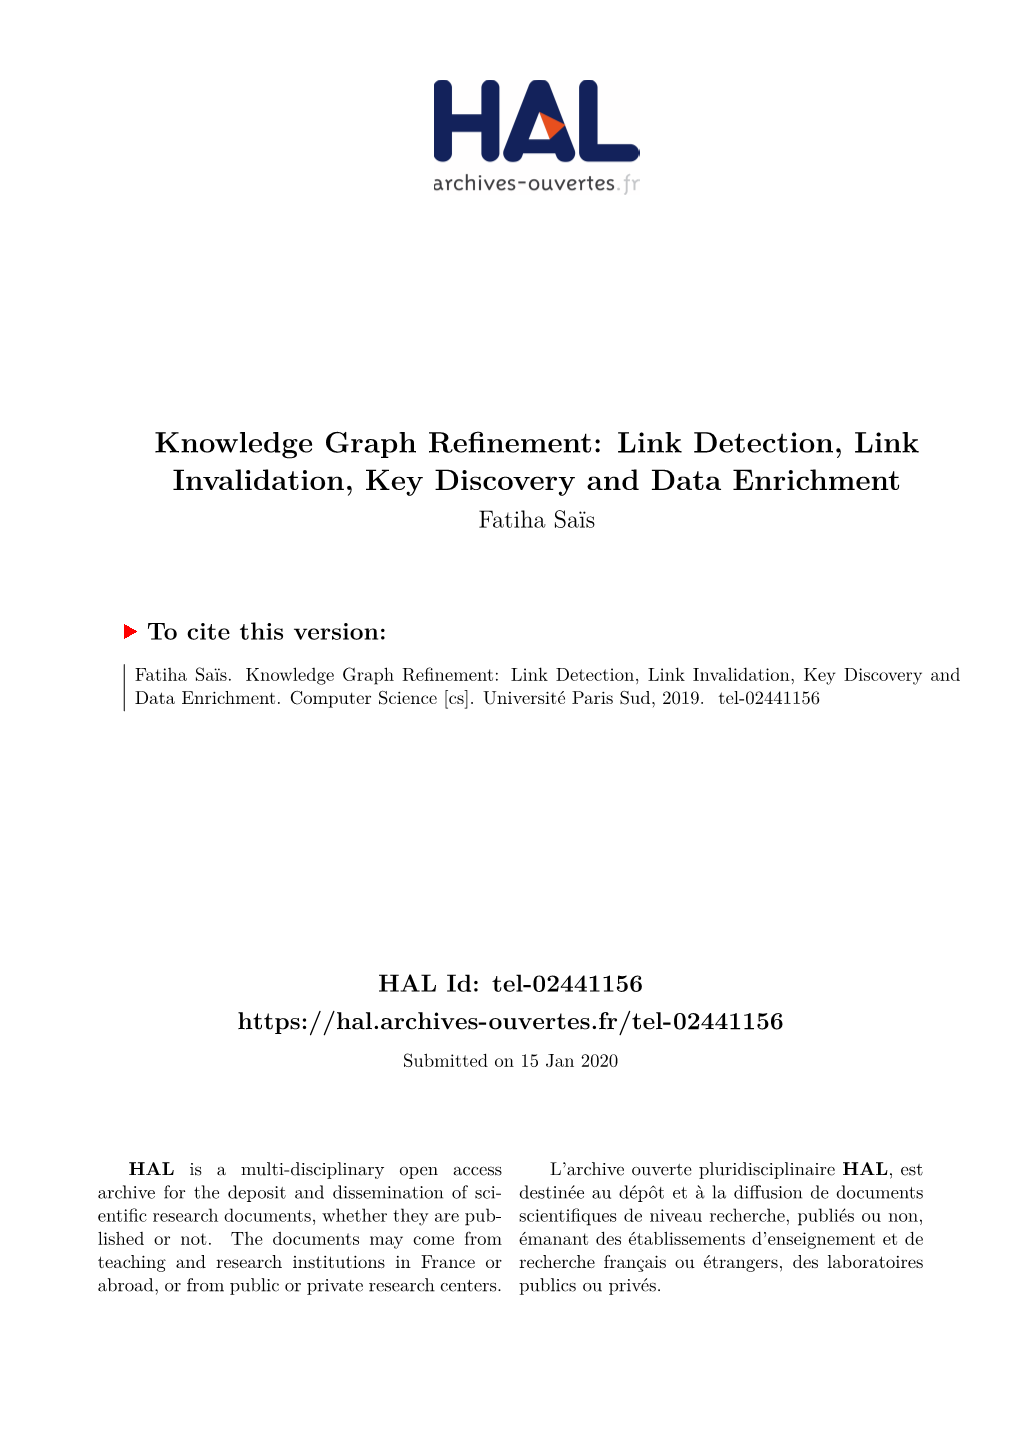 Knowledge Graph Refinement: Link Detection, Link Invalidation, Key Discovery and Data Enrichment Fatiha Saïs